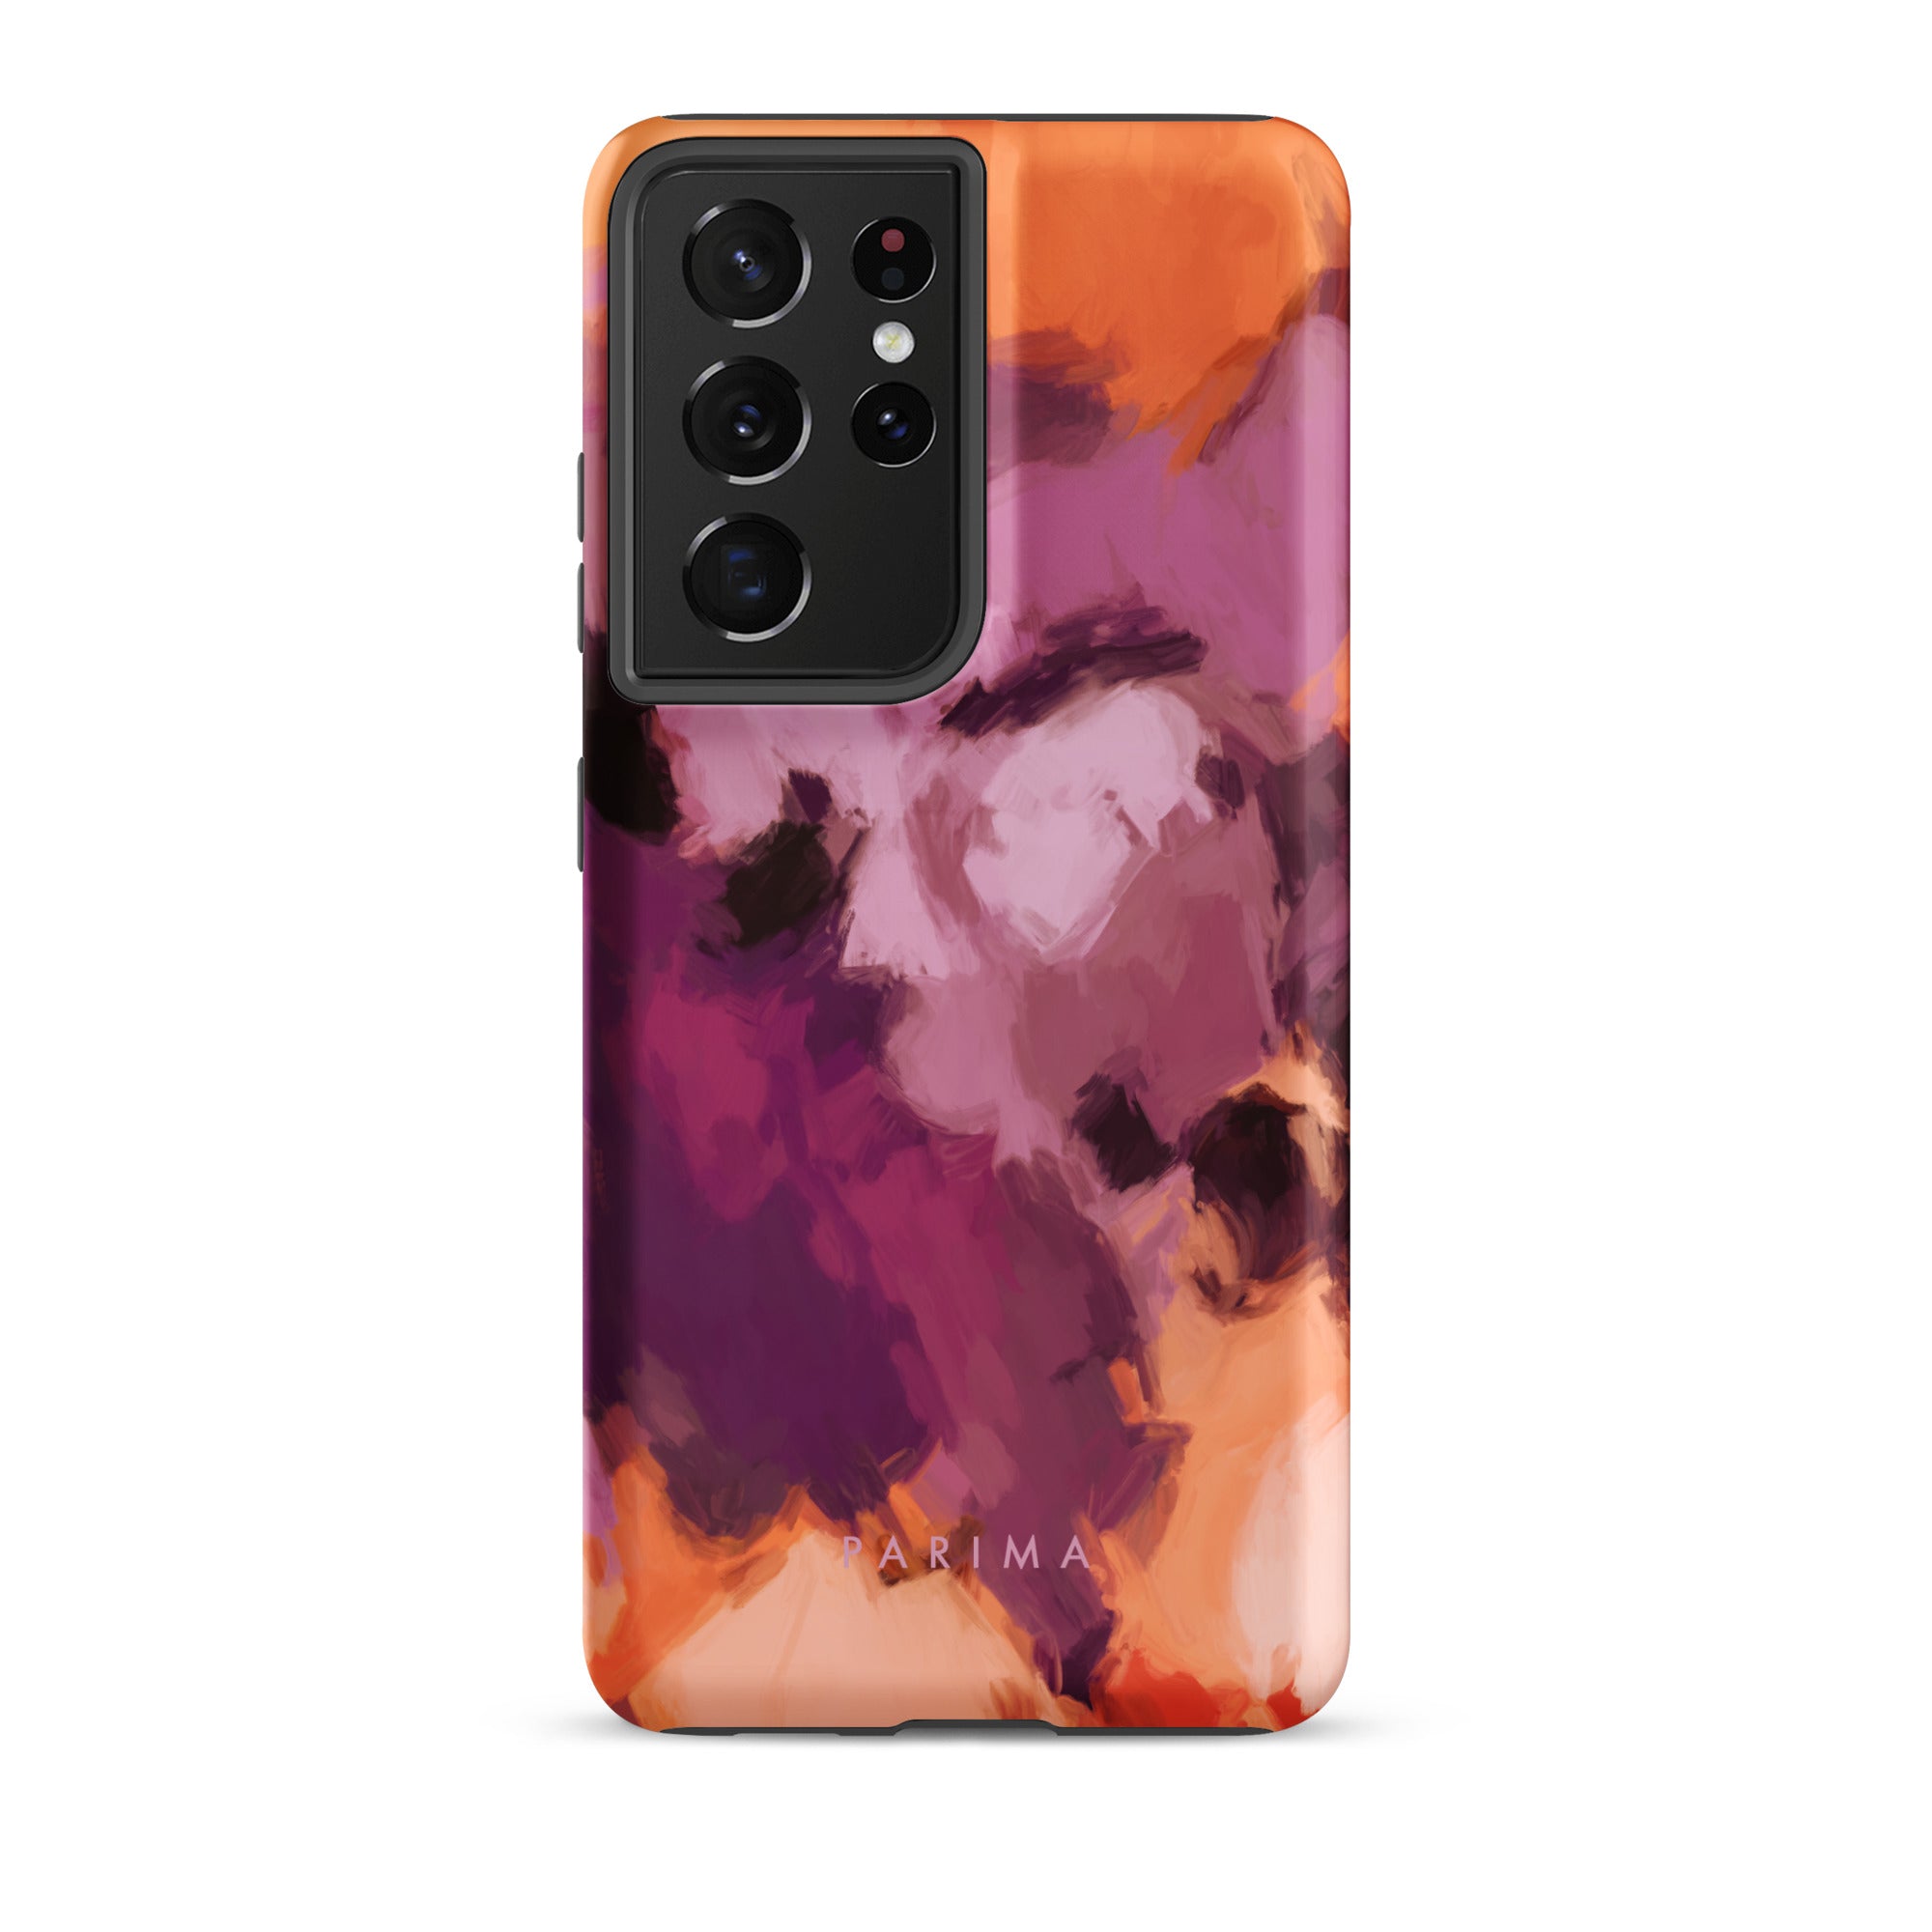 Lilac, purple and orange abstract art on Samsung Galaxy S21 Ultra tough case by Parima Studio